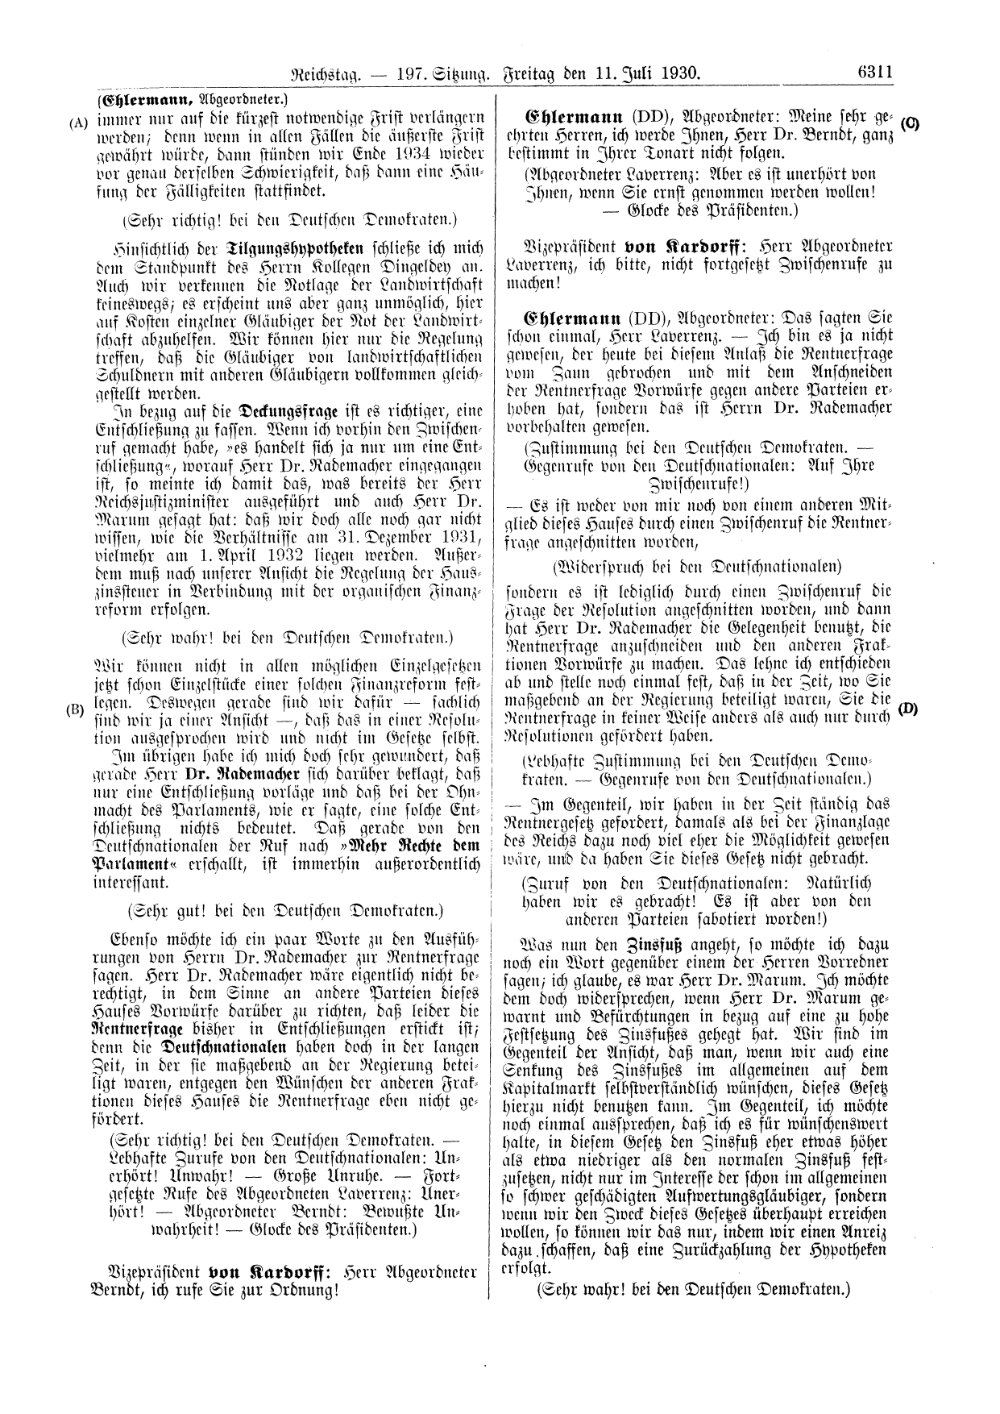 Scan of page 6311